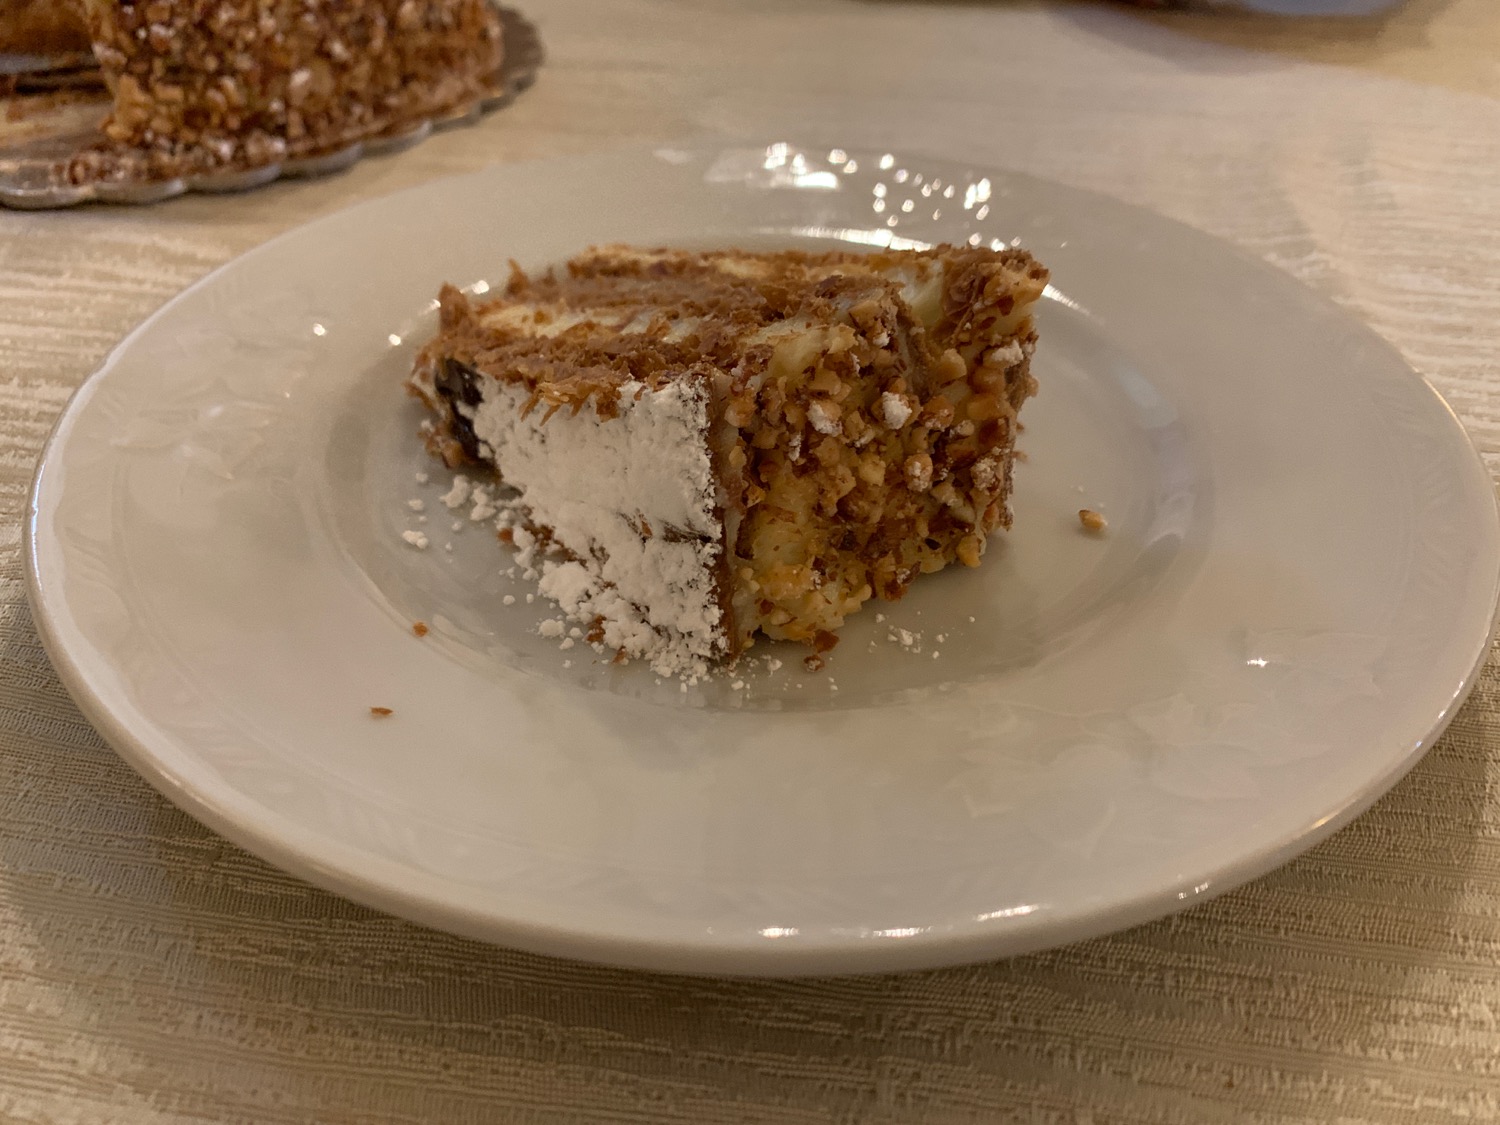 a slice of cake on a plate